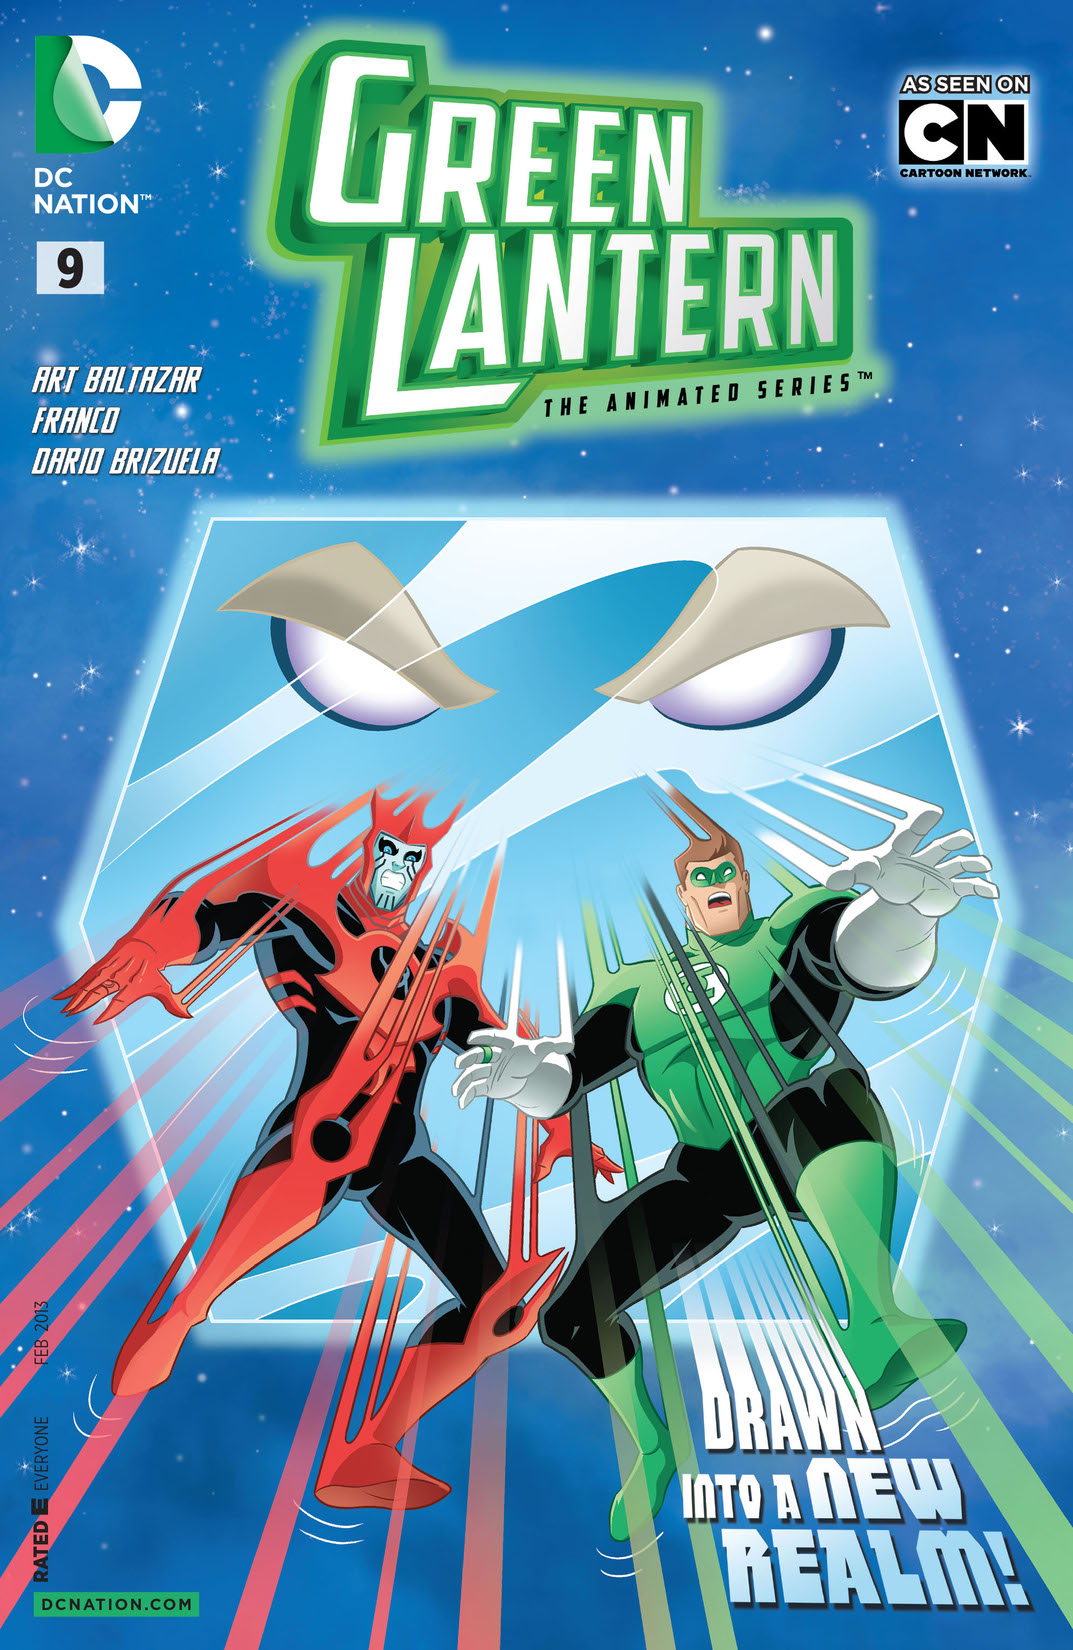 Green Lantern: The Animated Series #9 preview images